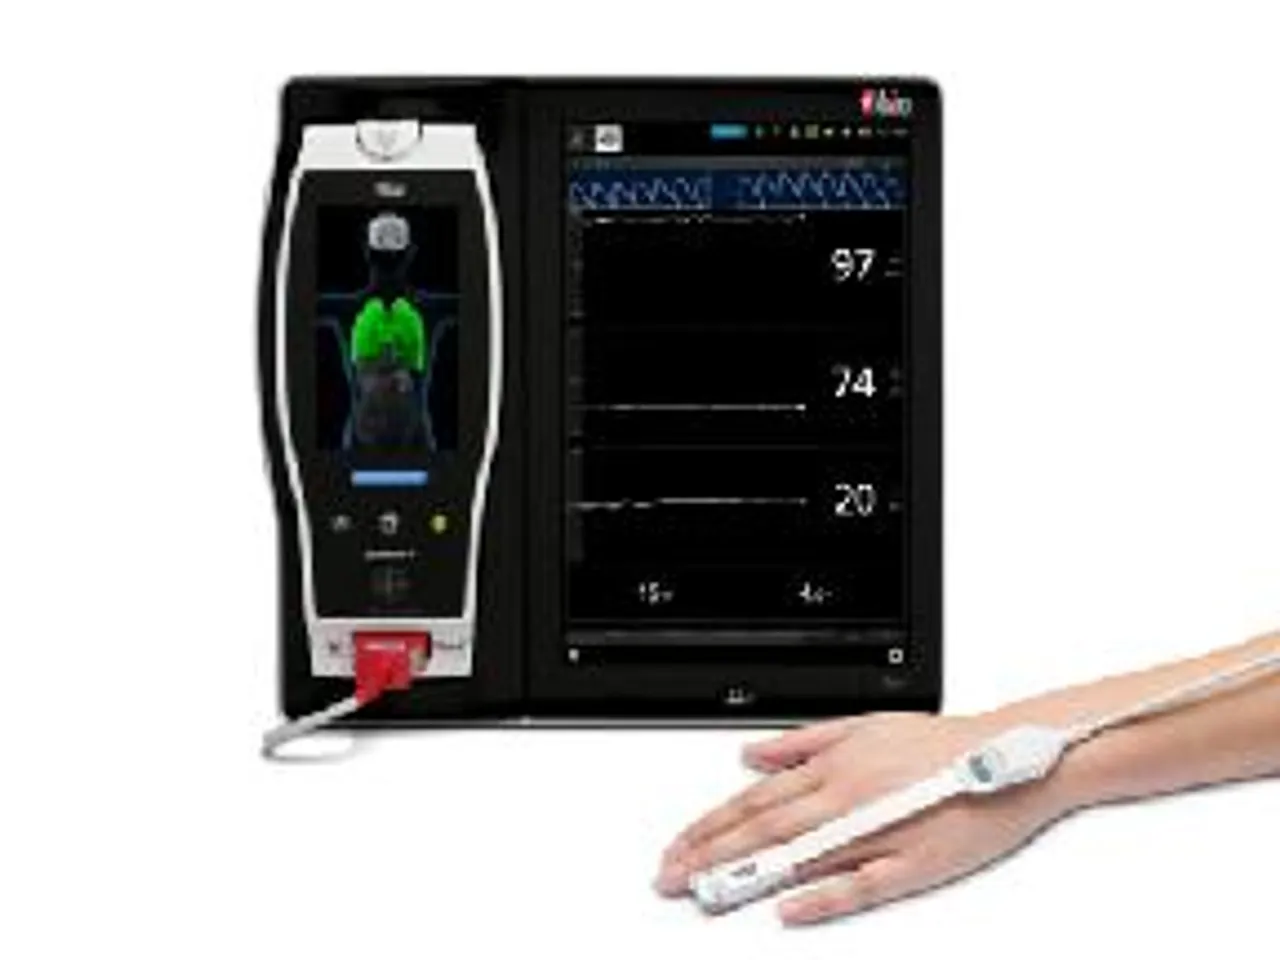 New Study Finds That Masimo PVi® Reliably Predicted Fluid Responsiveness in Young Children Undergoing Neurosurgery